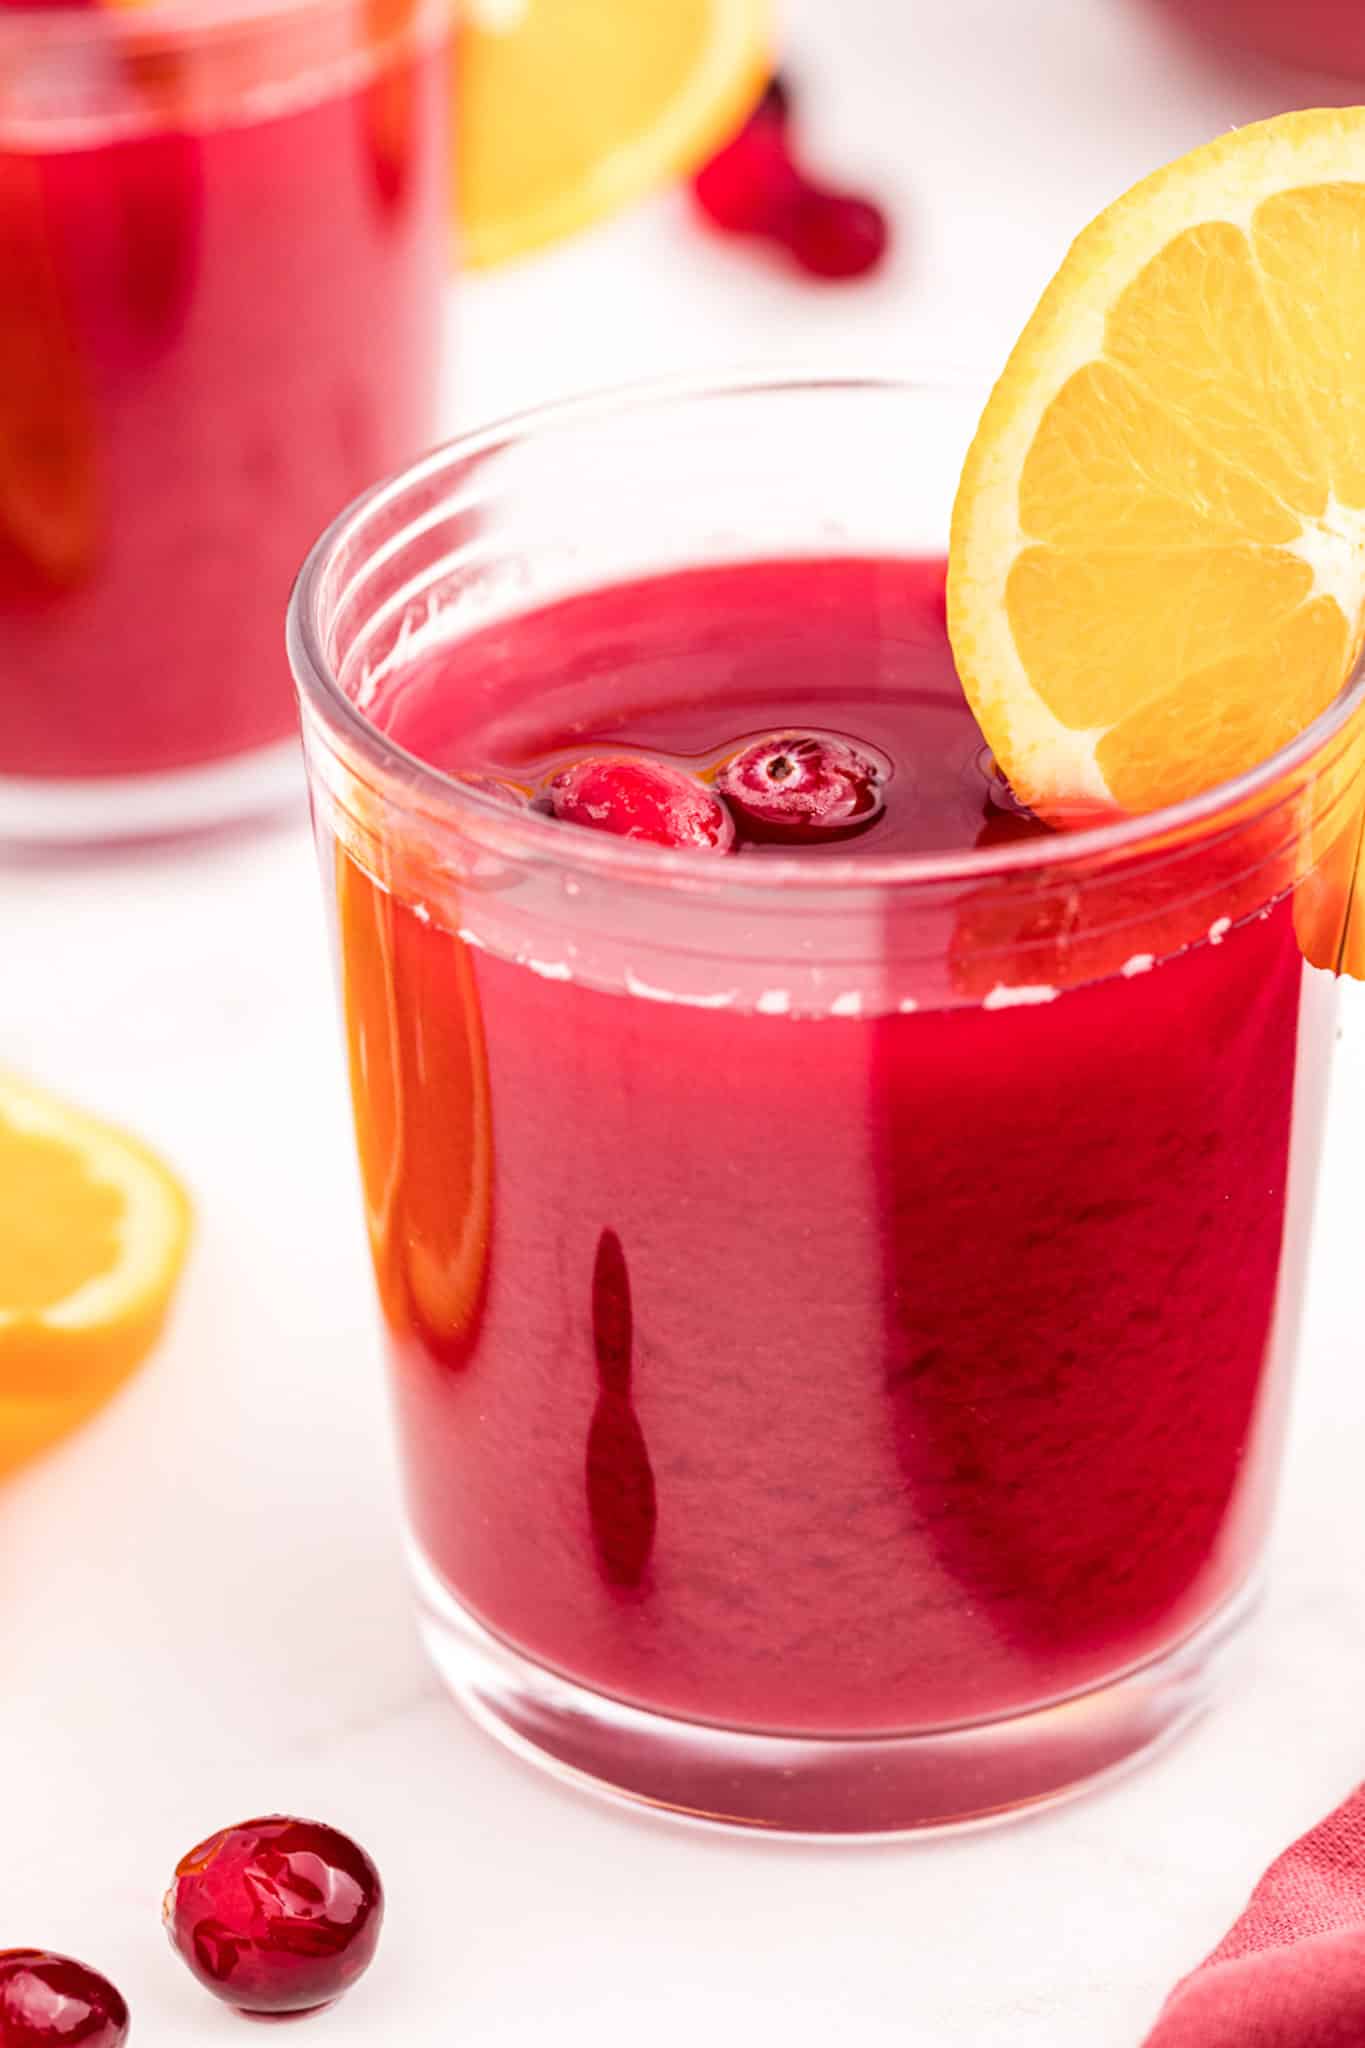 glass of red brunch punch garnished with an orange slice on a table.